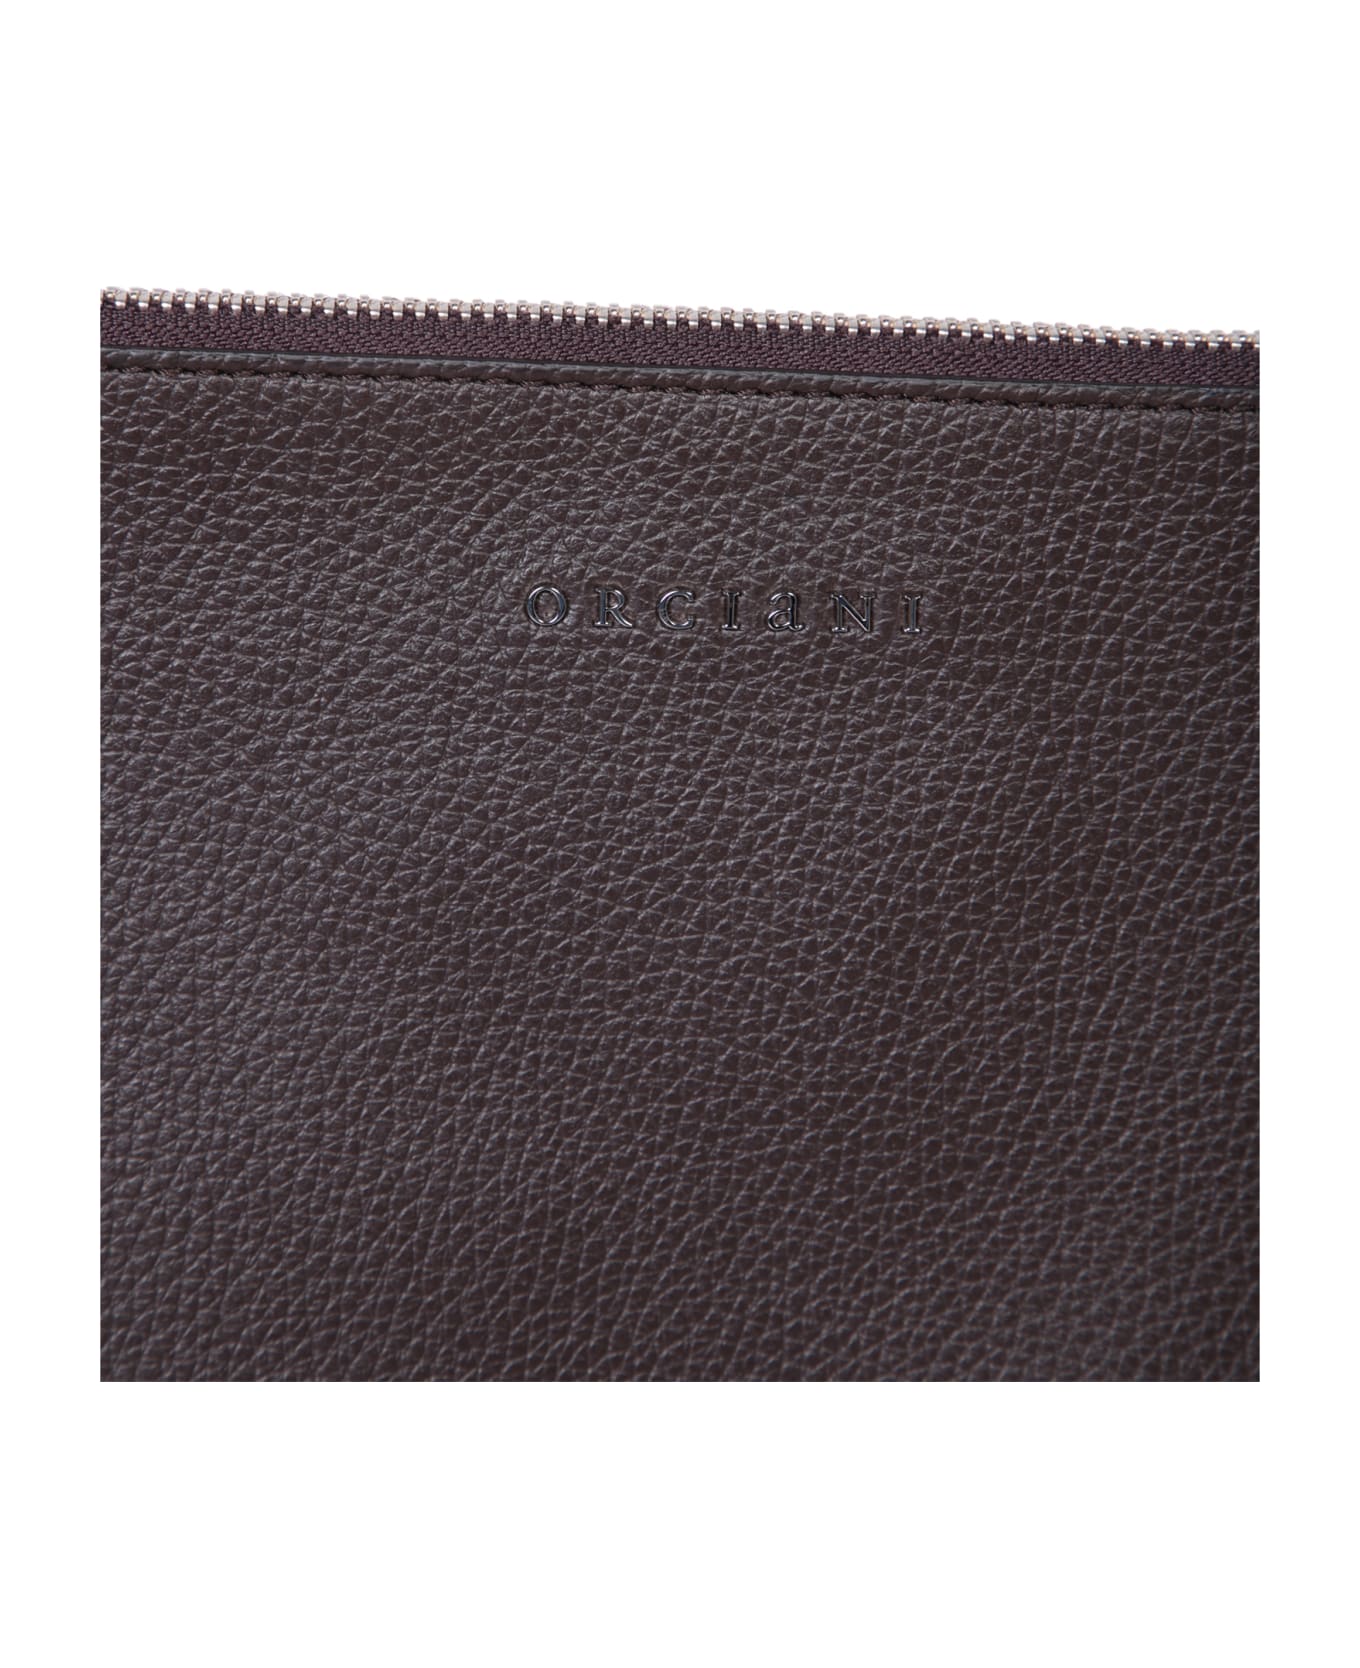 Orciani Micron Brown Documet Holder - Brown